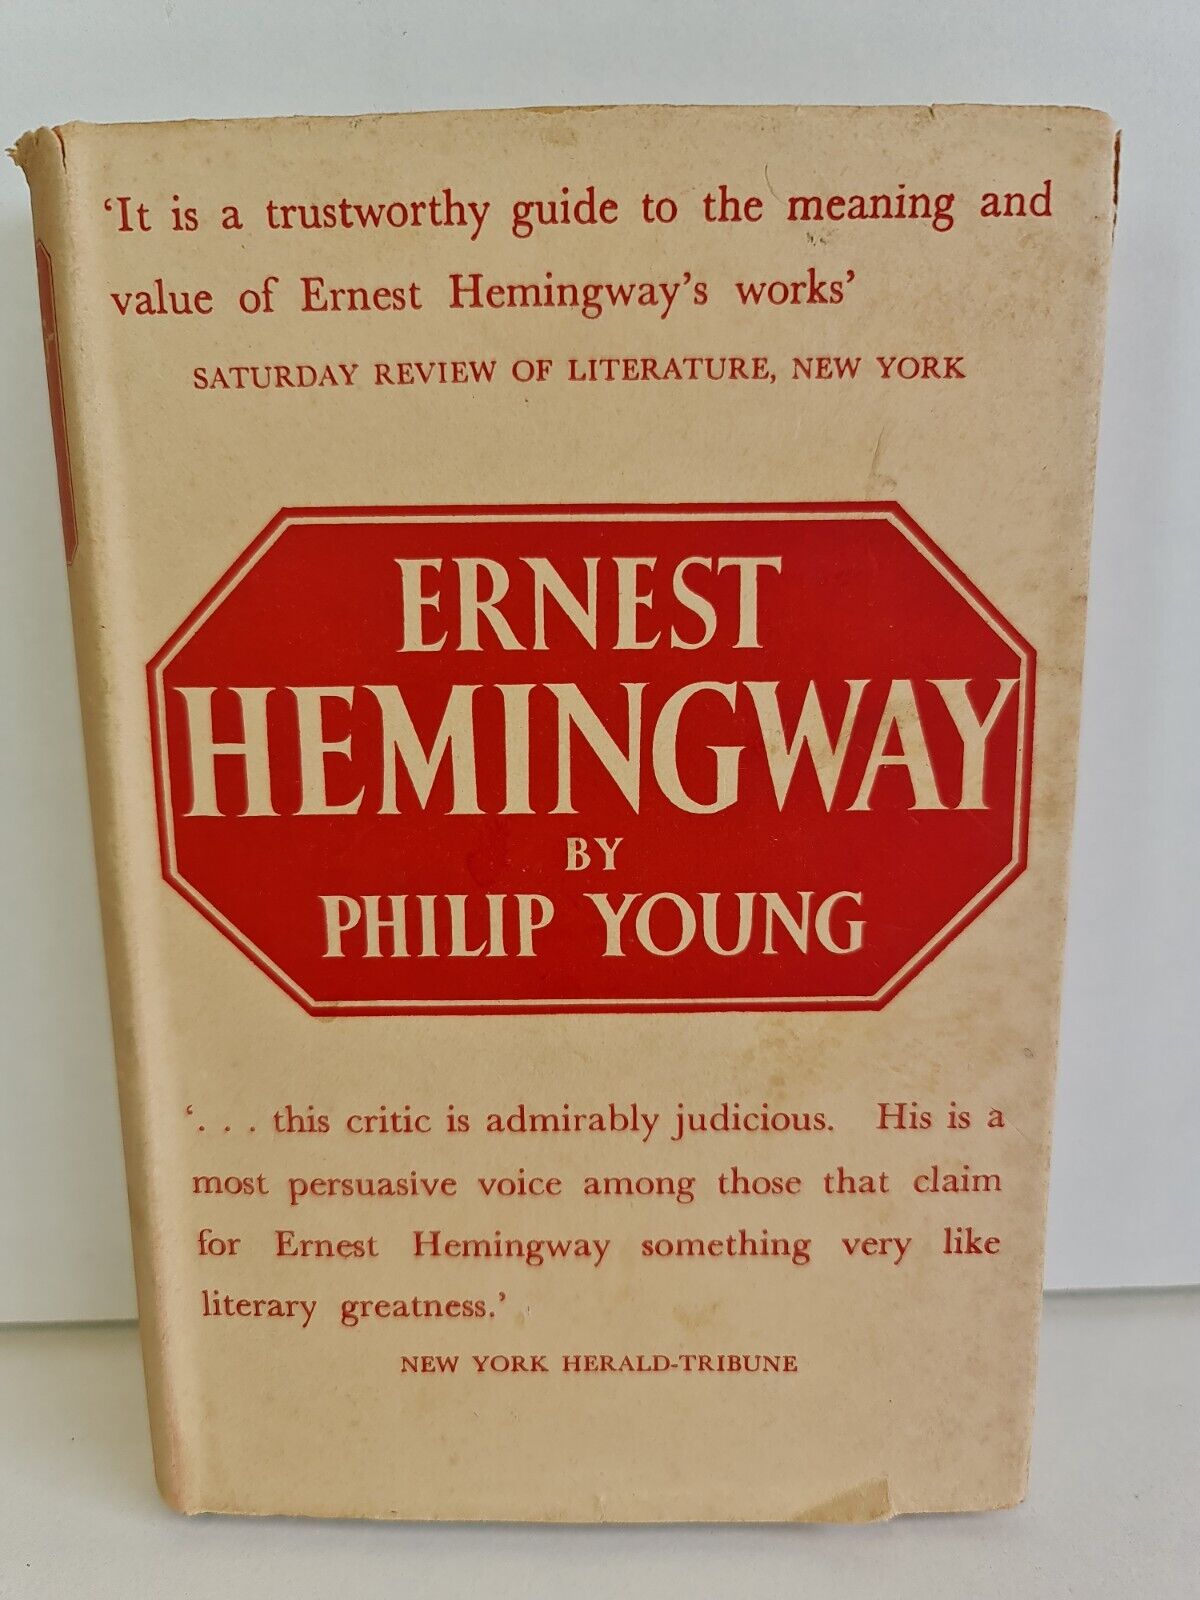 Ernest Hemingway by Philip Young (1952)